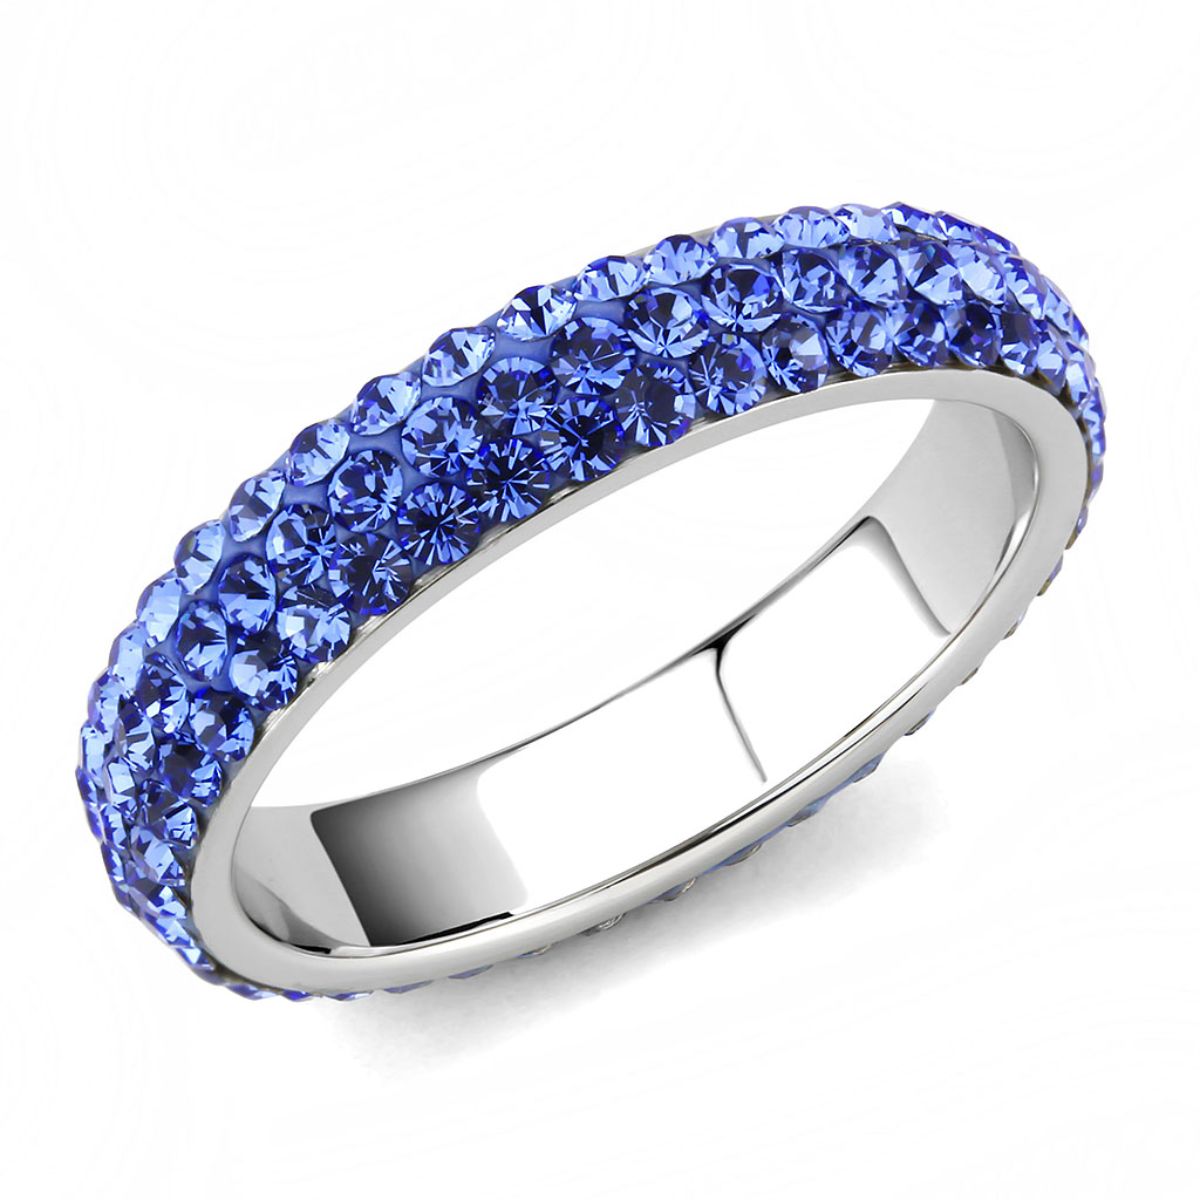 Luxe Jewelry Designs Stainless Steel Pave Women's Ring with Sapphire Crystals - Size 7